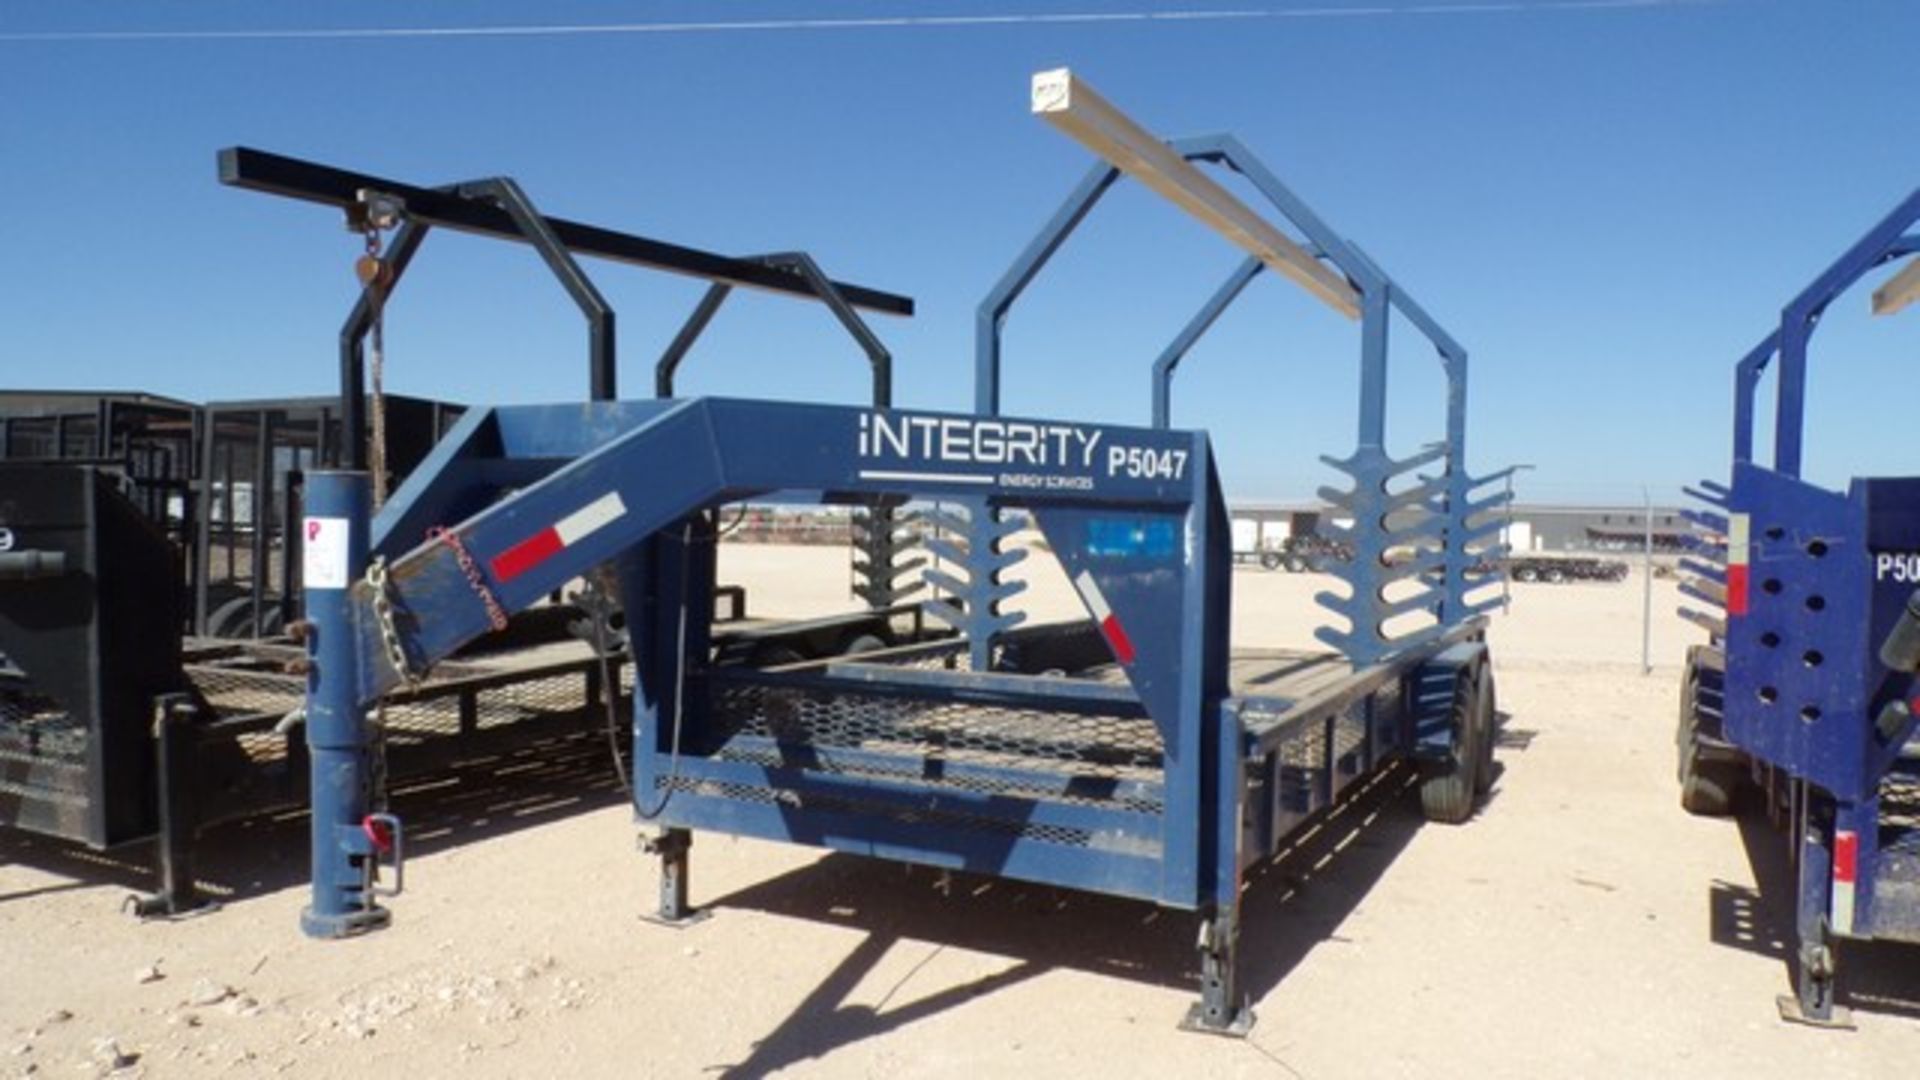 Located in YARD 1 - Midland, TX (P5047) (2358) (X) 2019 PULL DO T/A COMBO MONORAIL/ TOOL TRAILER, - Image 2 of 4